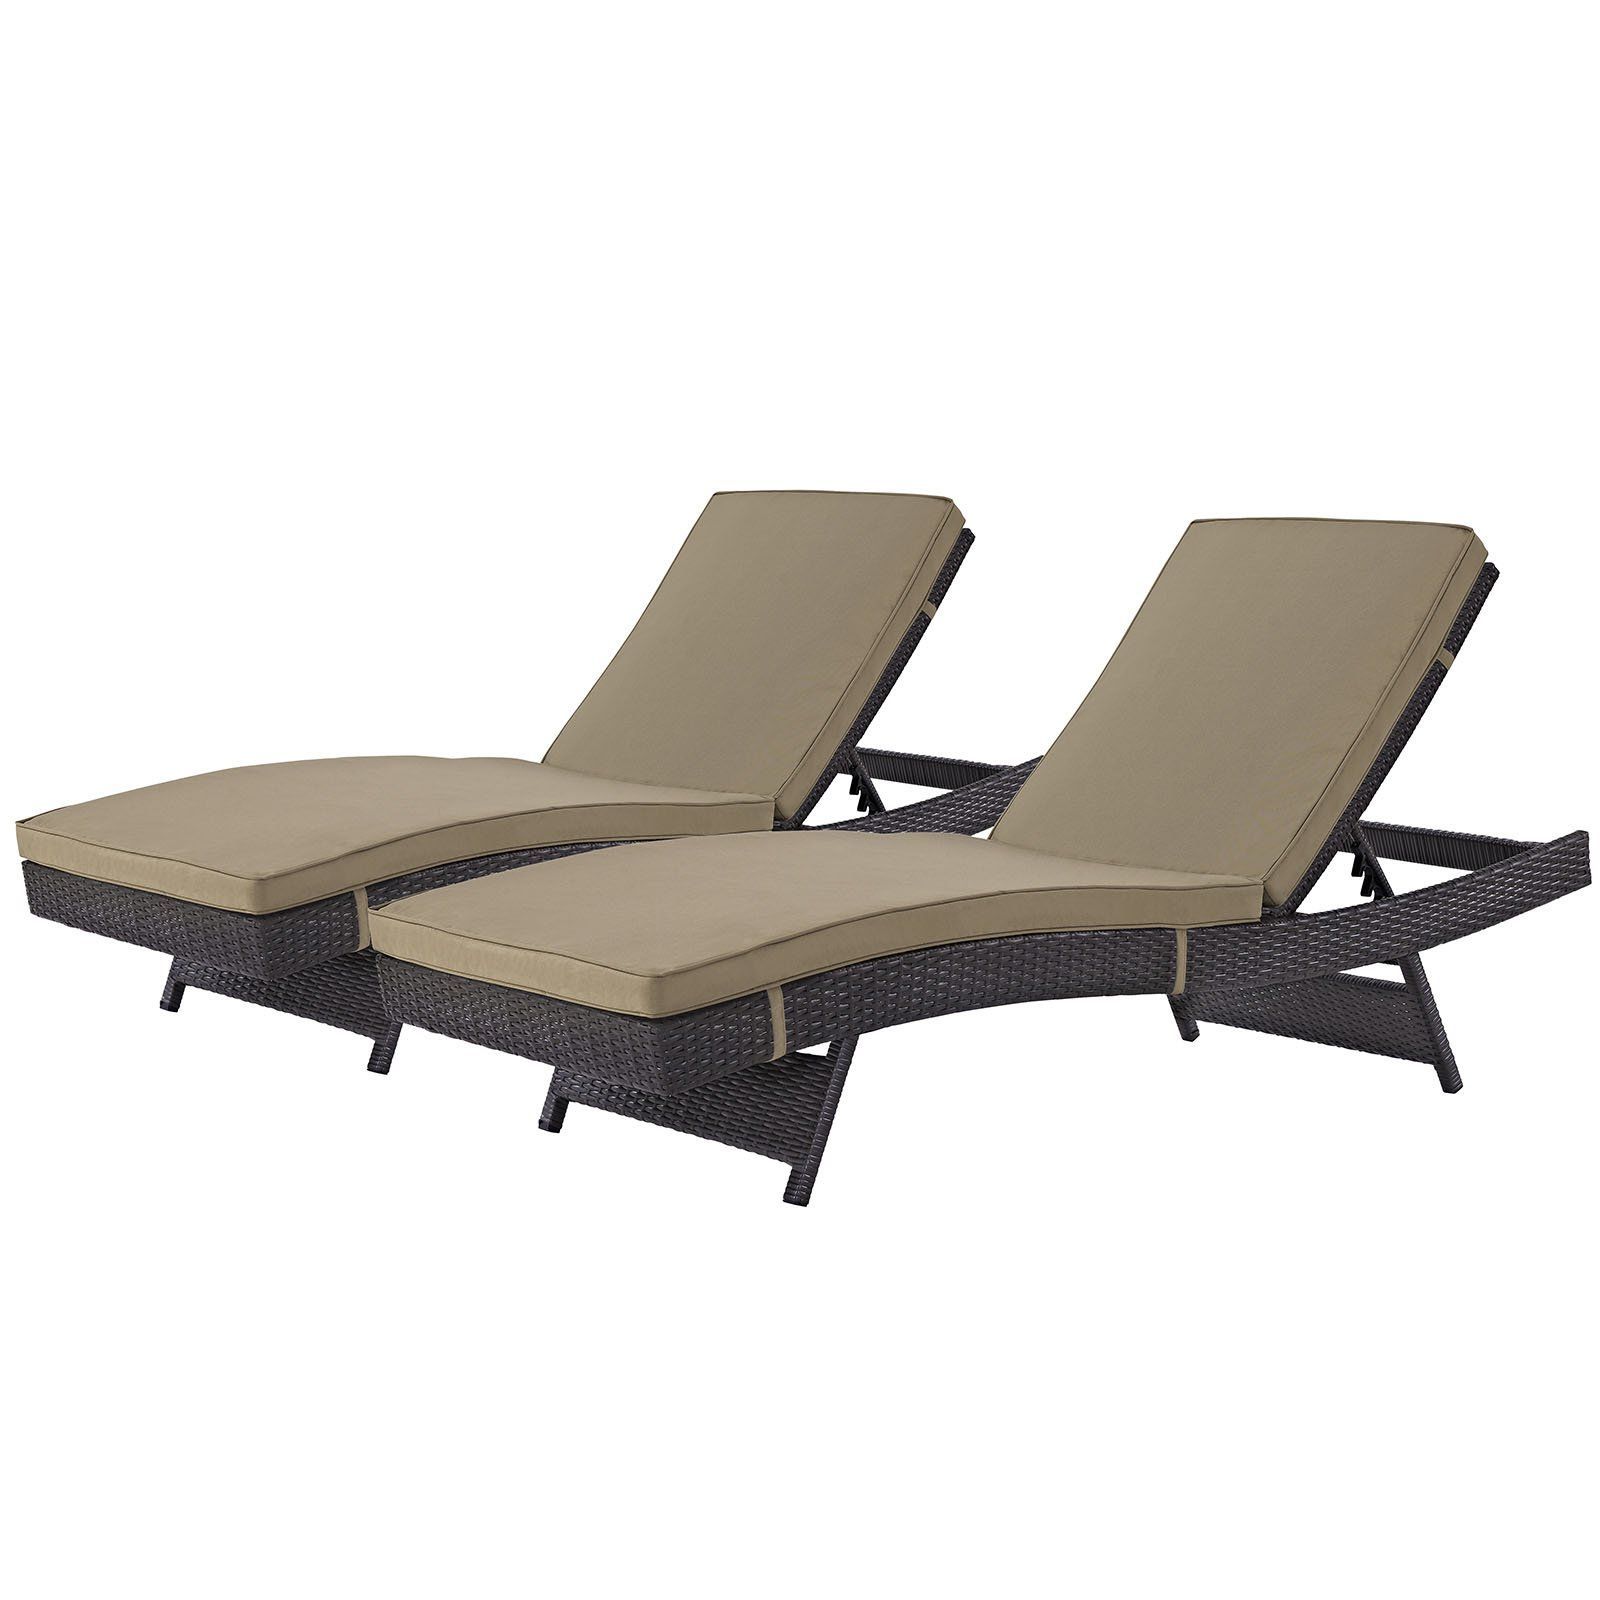 Mocha Fabric Outdoor Wicker Armchair Sets Intended For Most Recently Released Convene Rattan Outdoor Patio Chaise (set Of 2) (View 7 of 15)